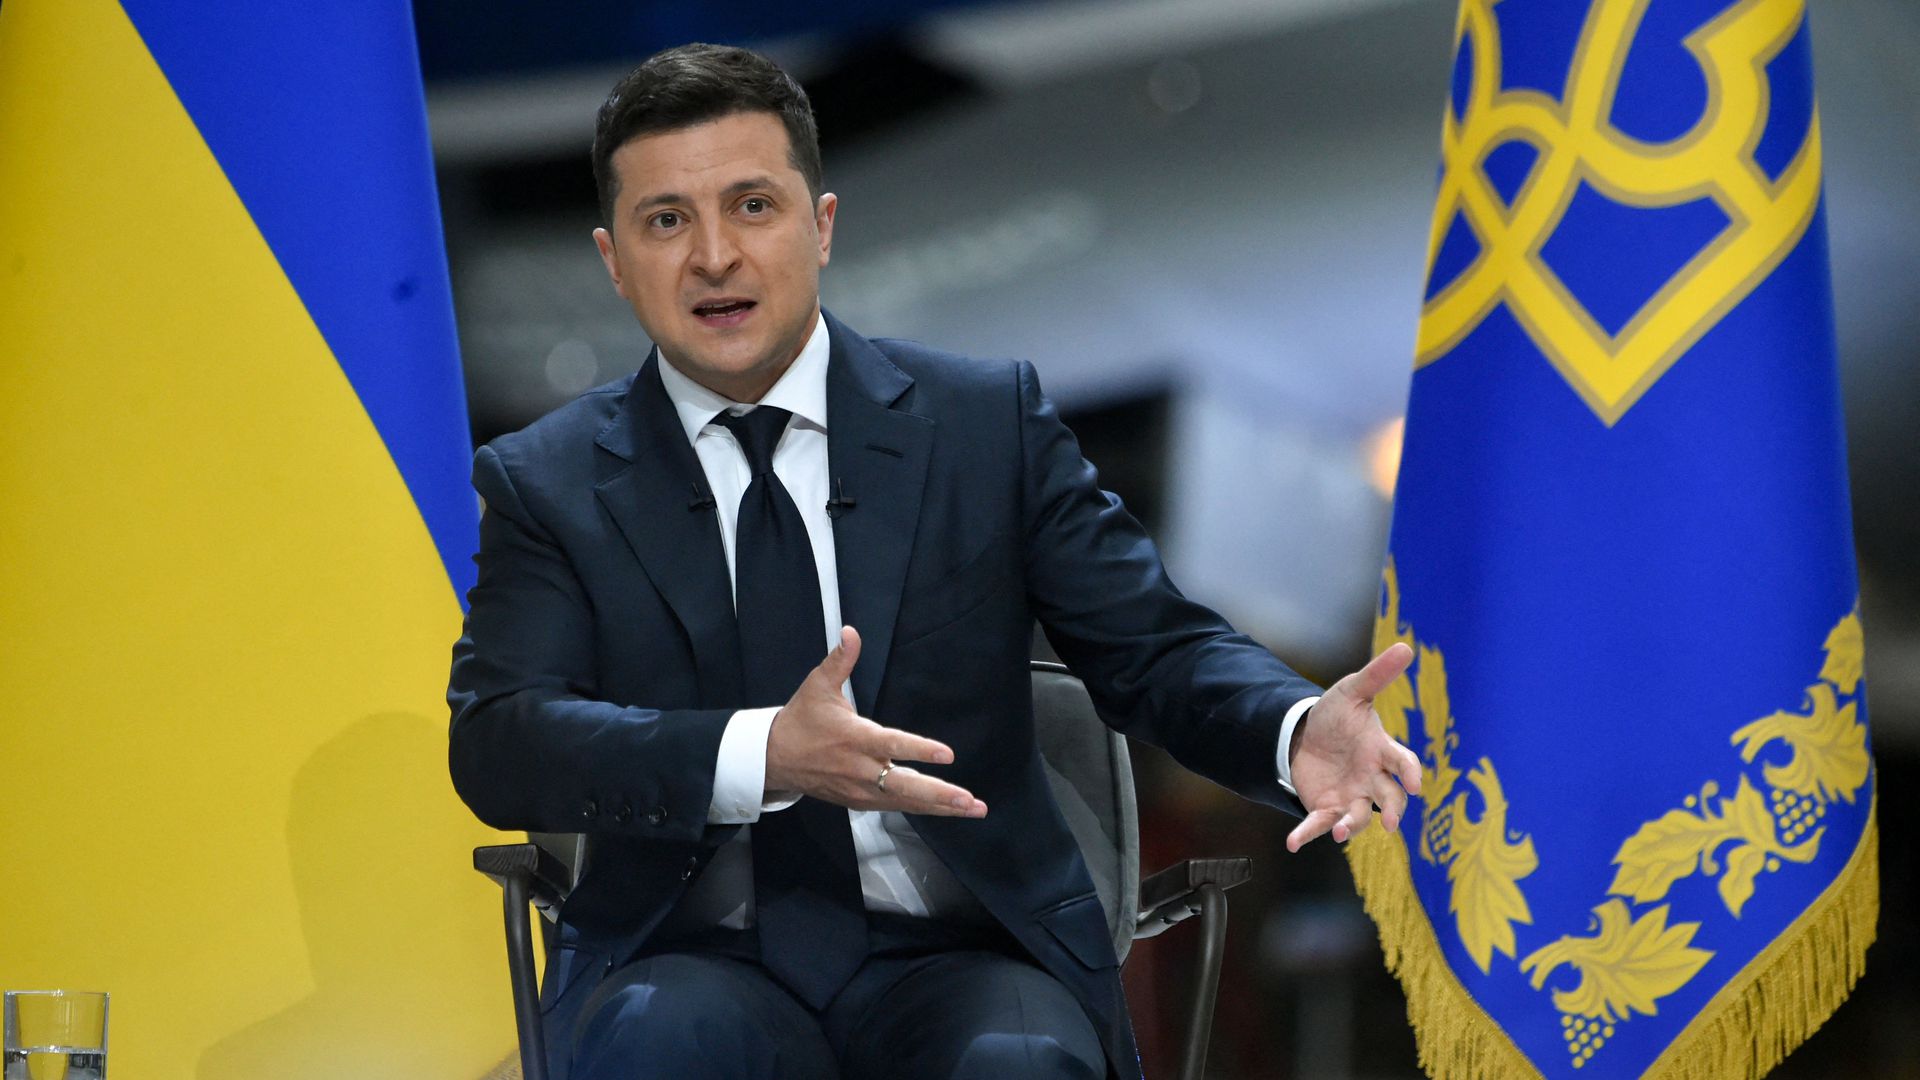 Zelensky Is Ready to Meet with Biden Ahead of His Summit with Putin